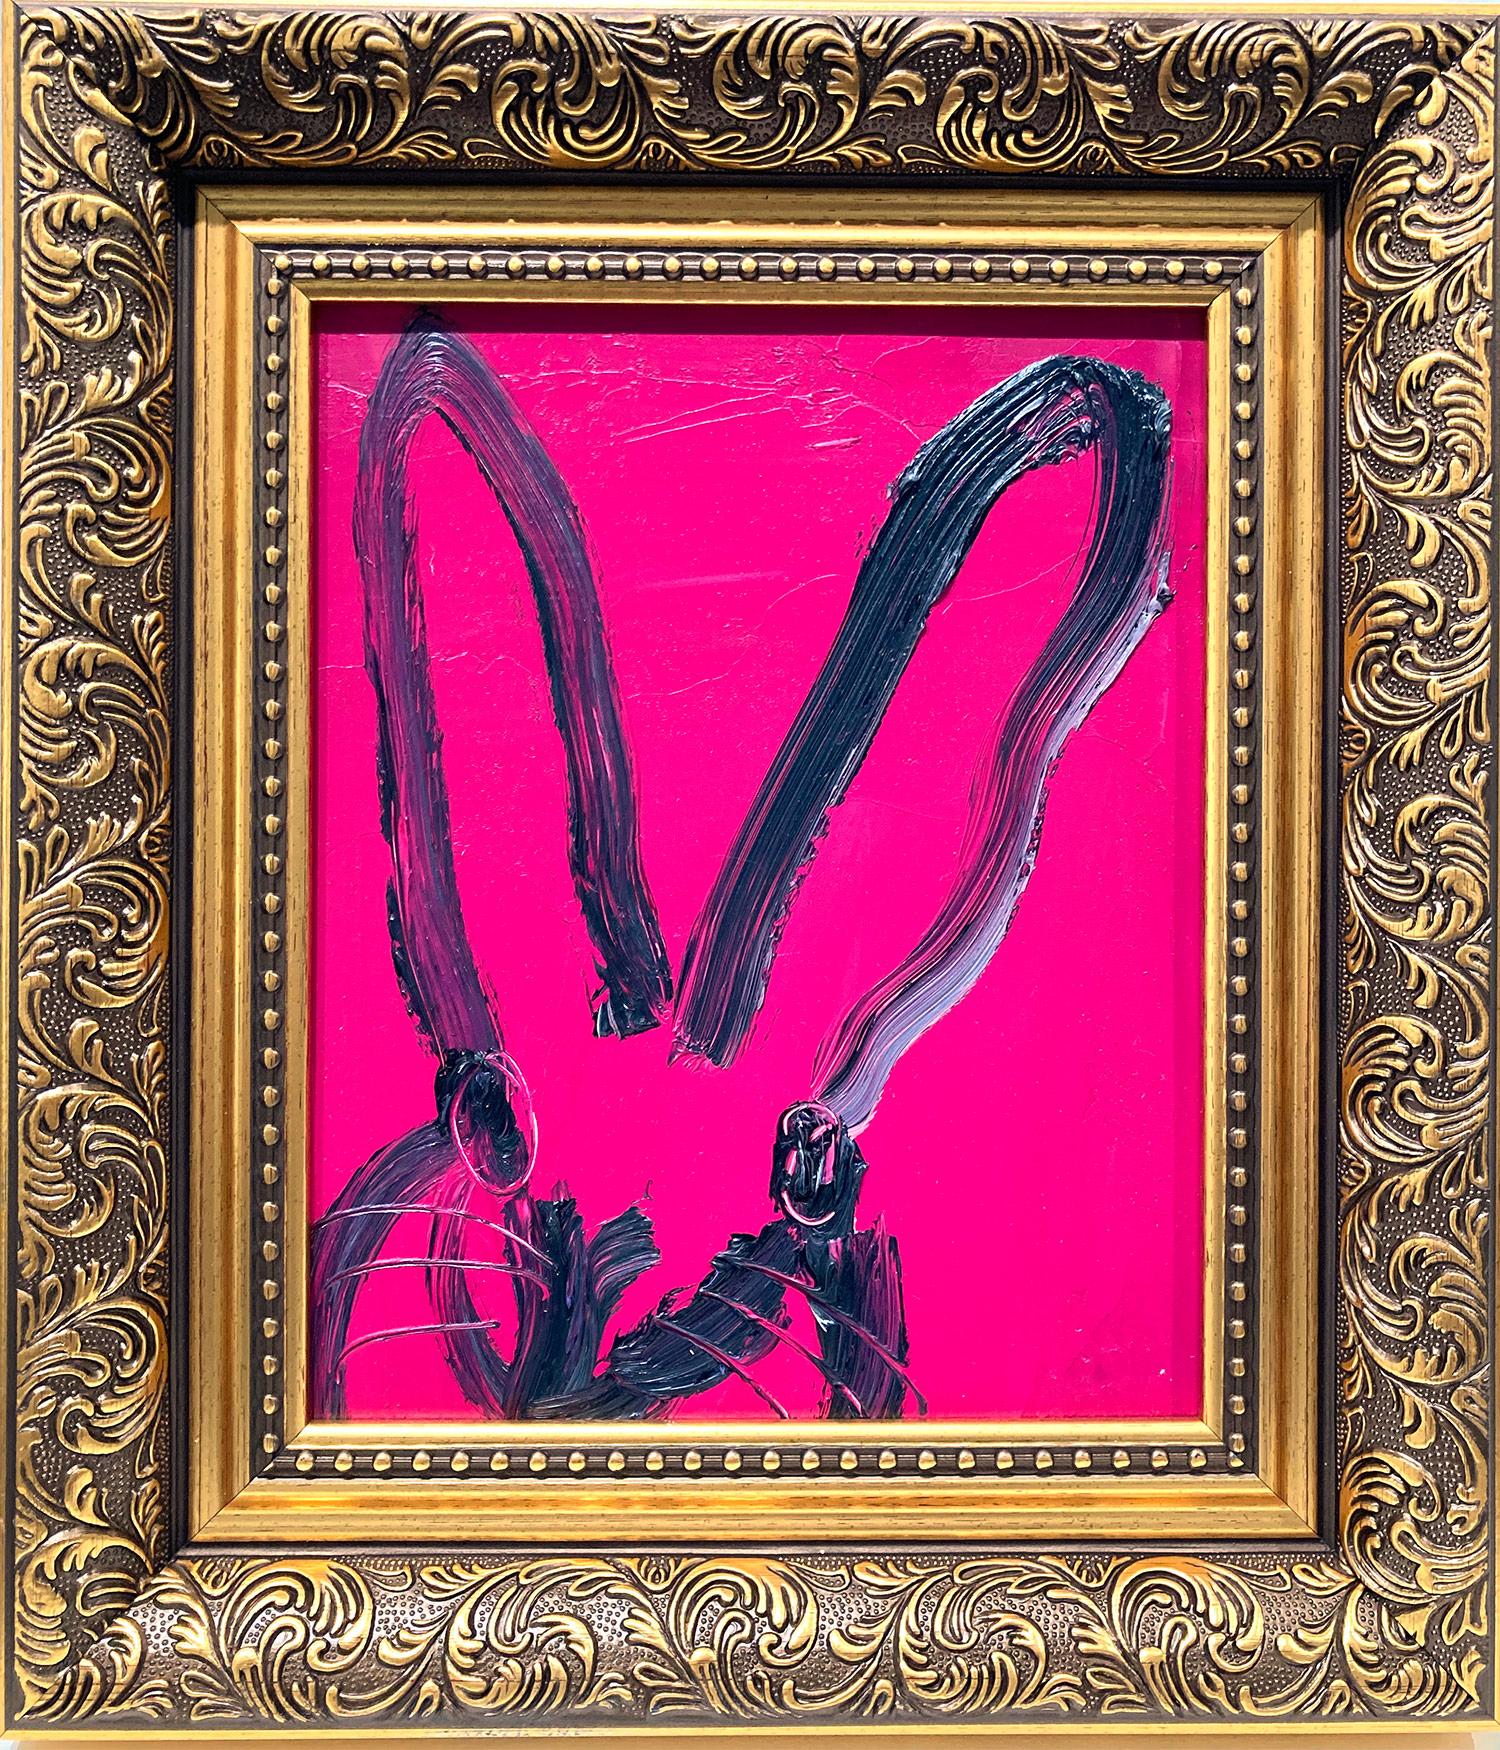 Hunt Slonem Abstract Painting - "Regal Road" Black Bunny on Hot Pink Background Oil Painting on Wood Panel